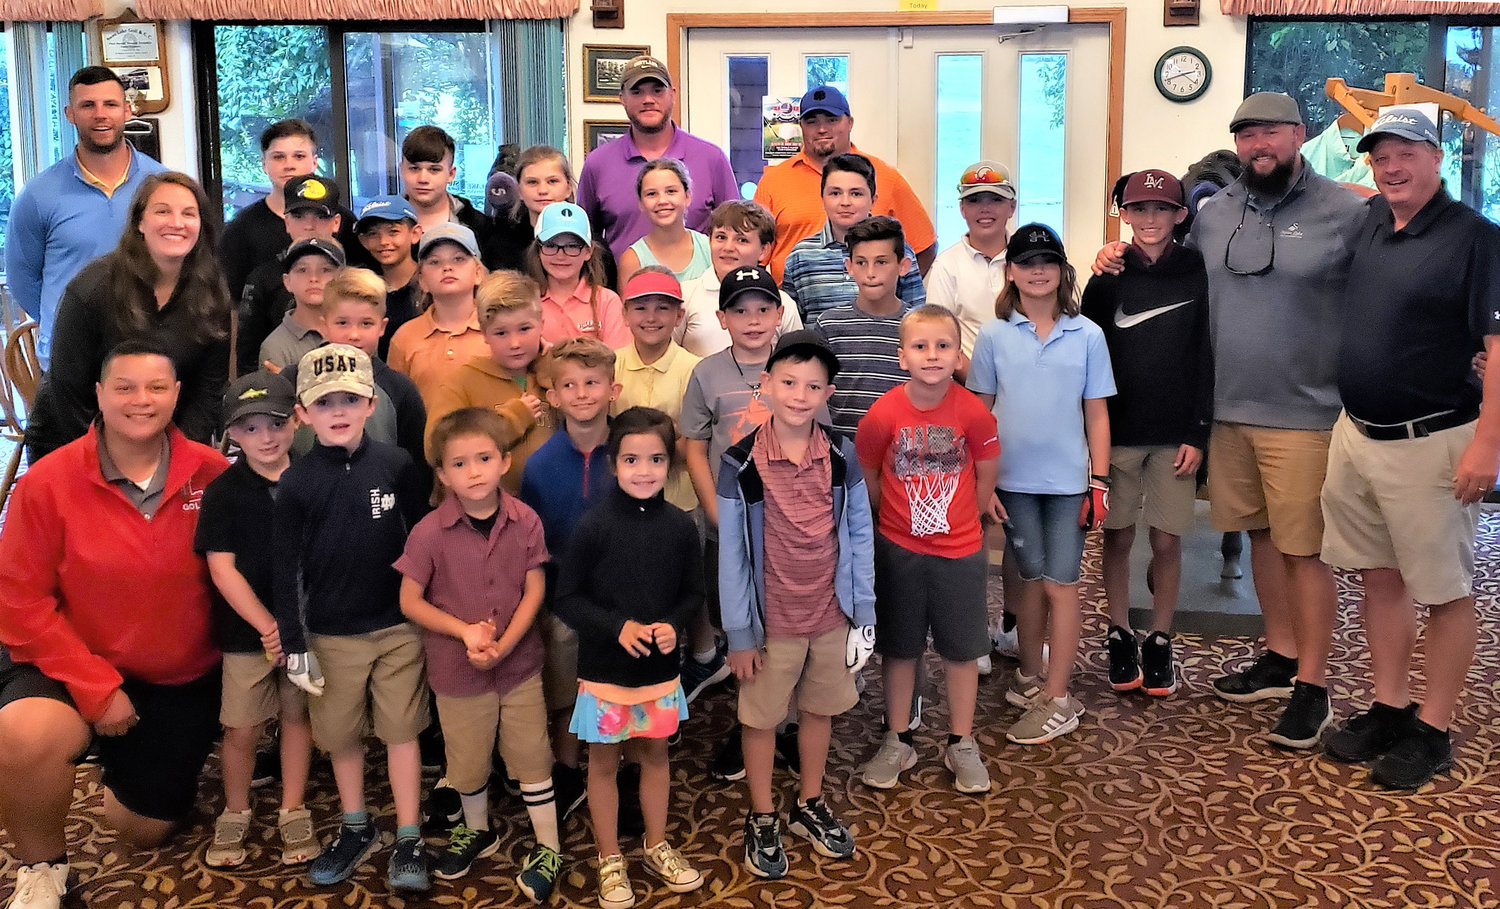 All the campers and instructors at the Swan Lake Golf & Country Club Junior Golf Camp.